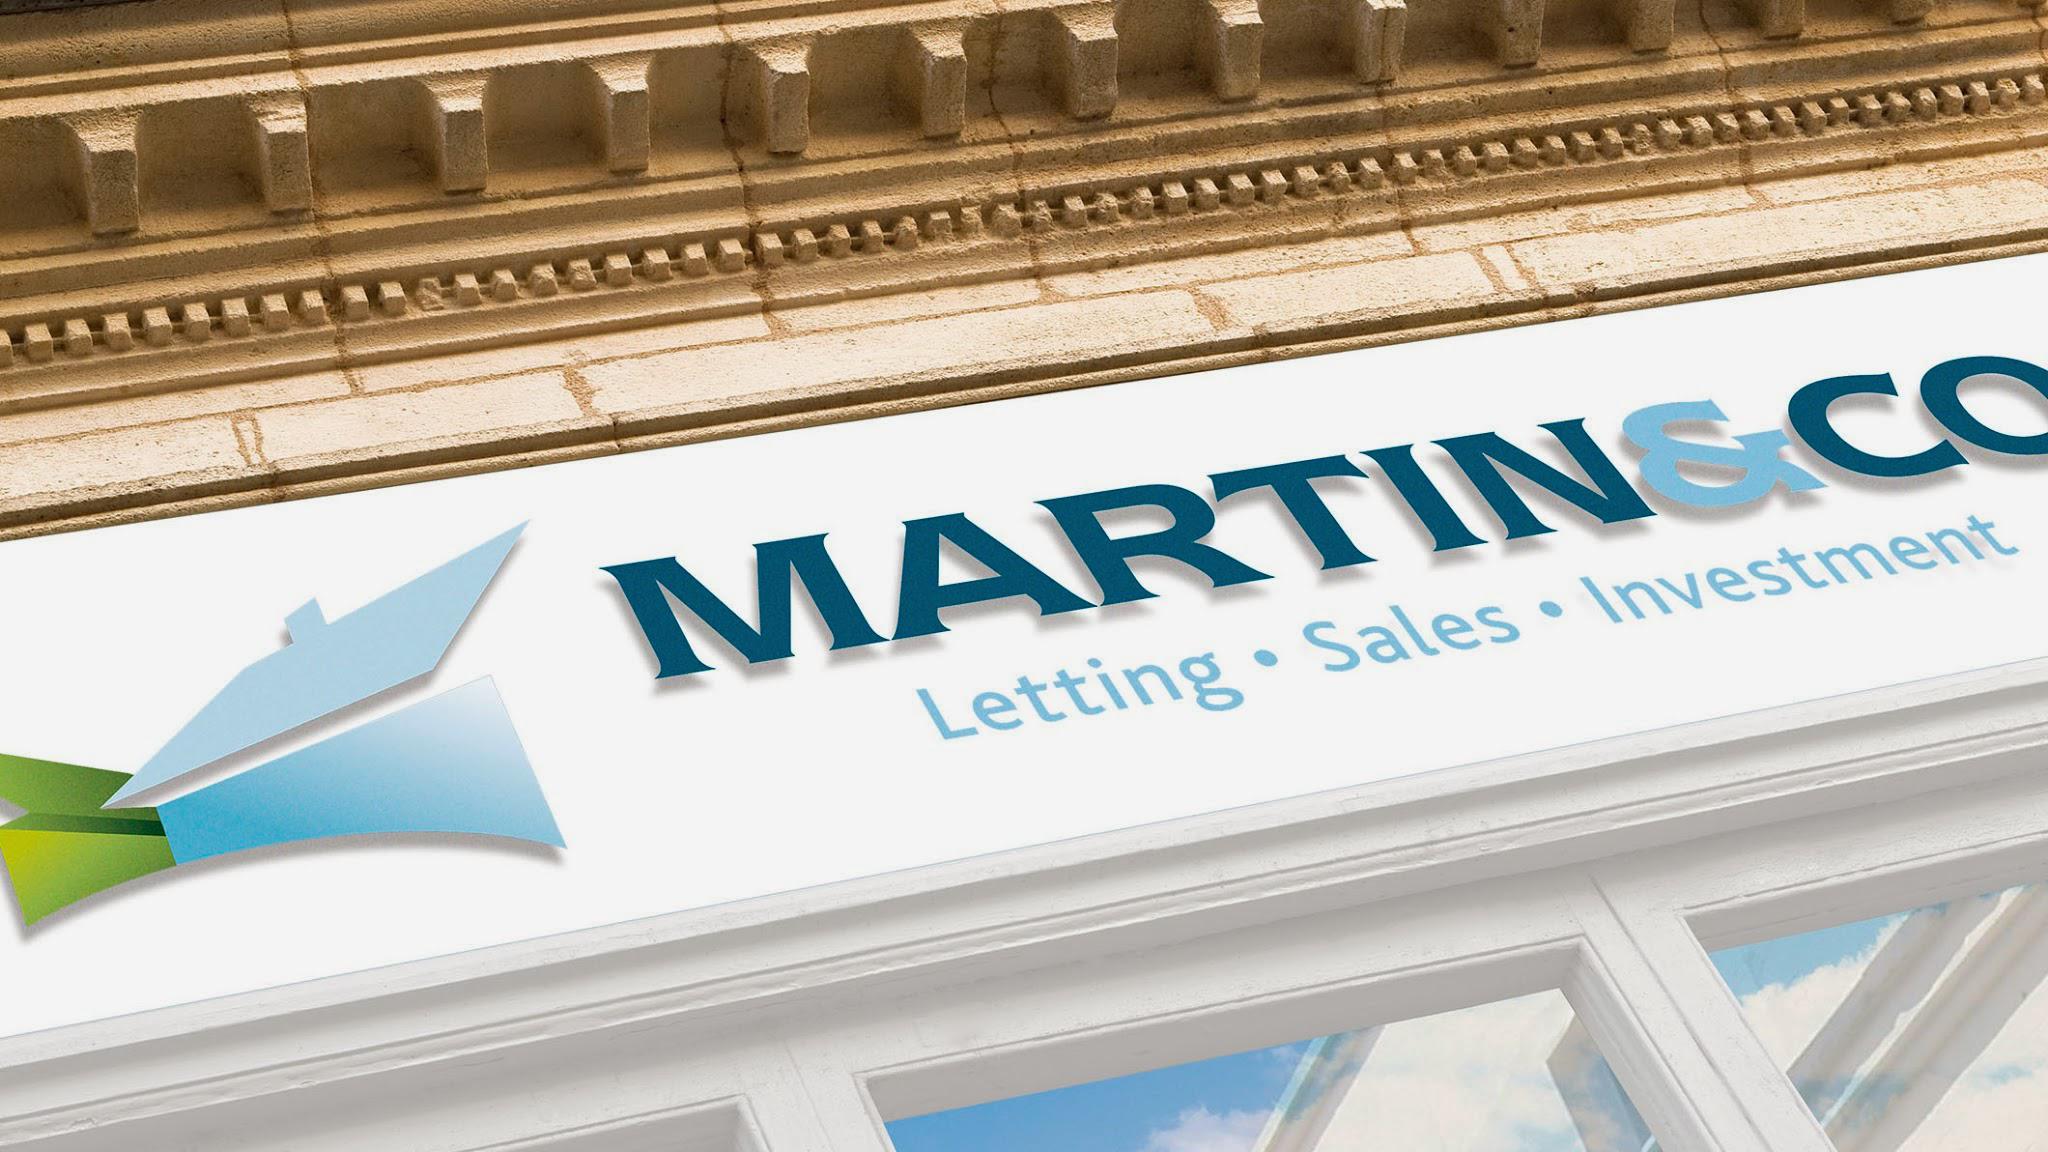 Images Martin & Co Stirling Lettings & Estate Agents